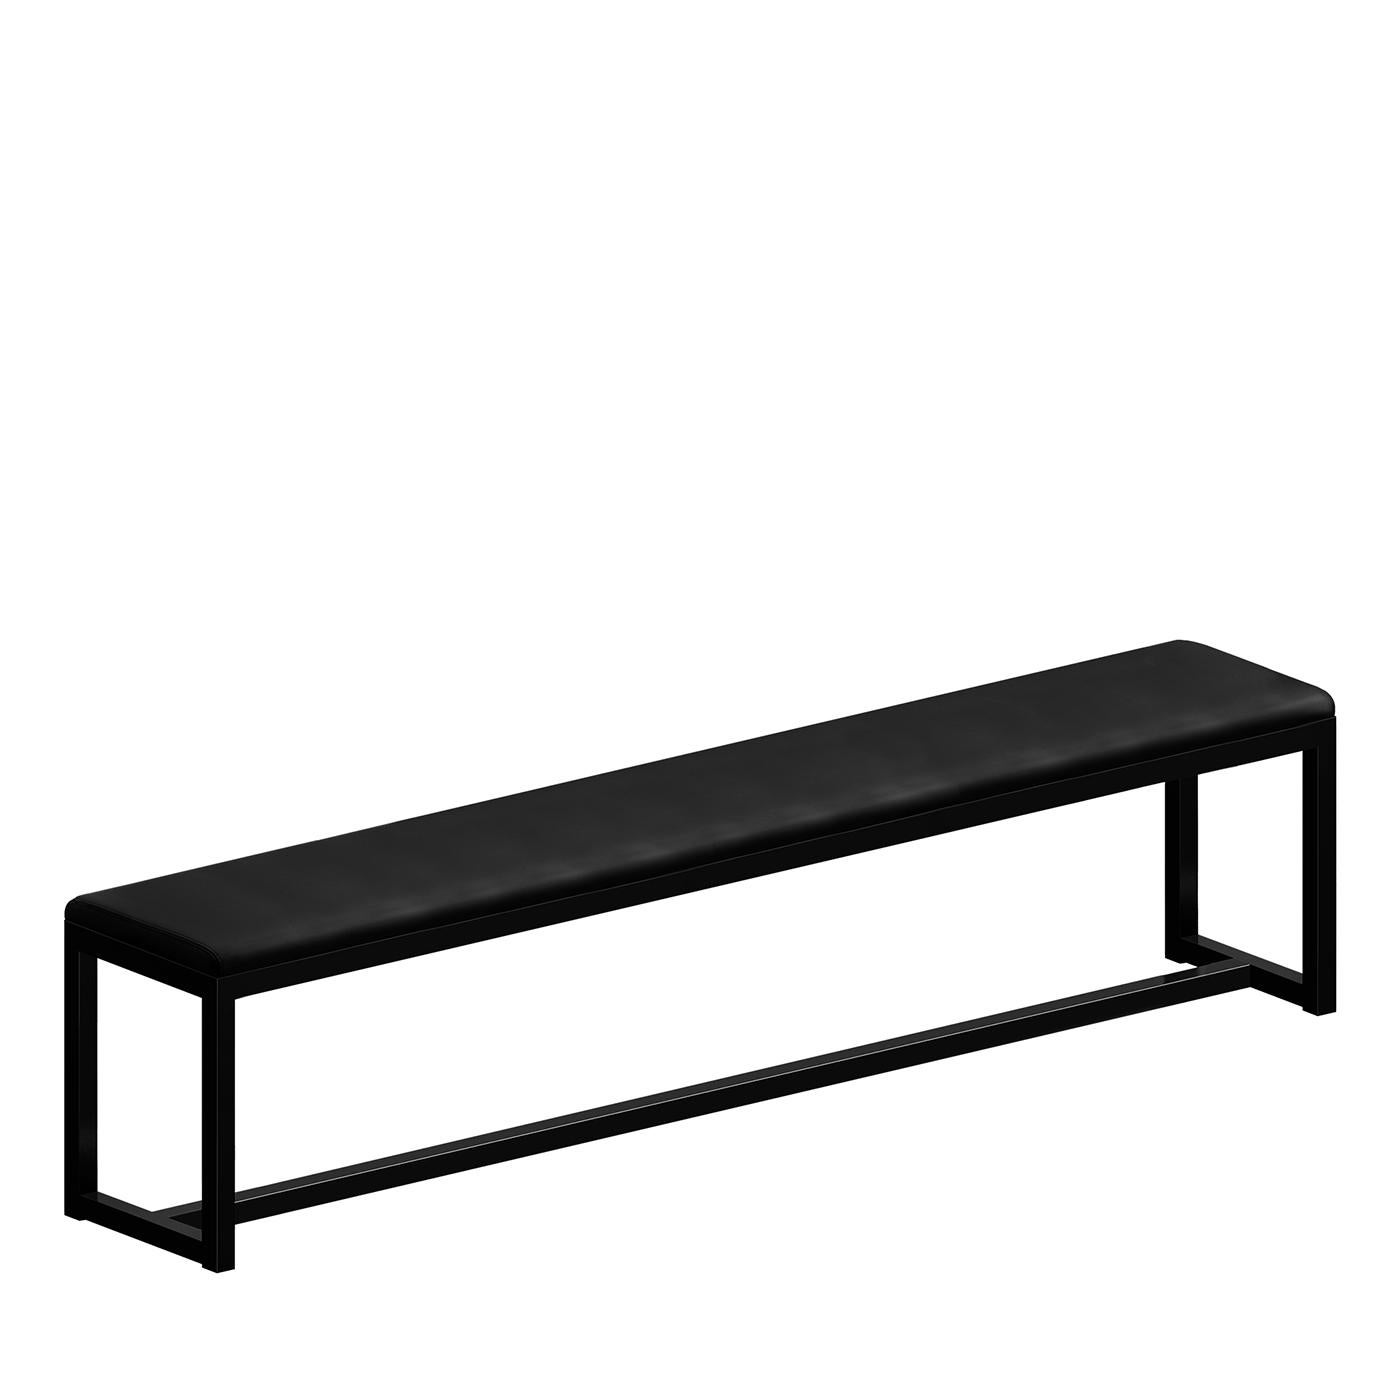 Big Brother Large Black Bench by Maurizio Peregalli In New Condition For Sale In Milan, IT